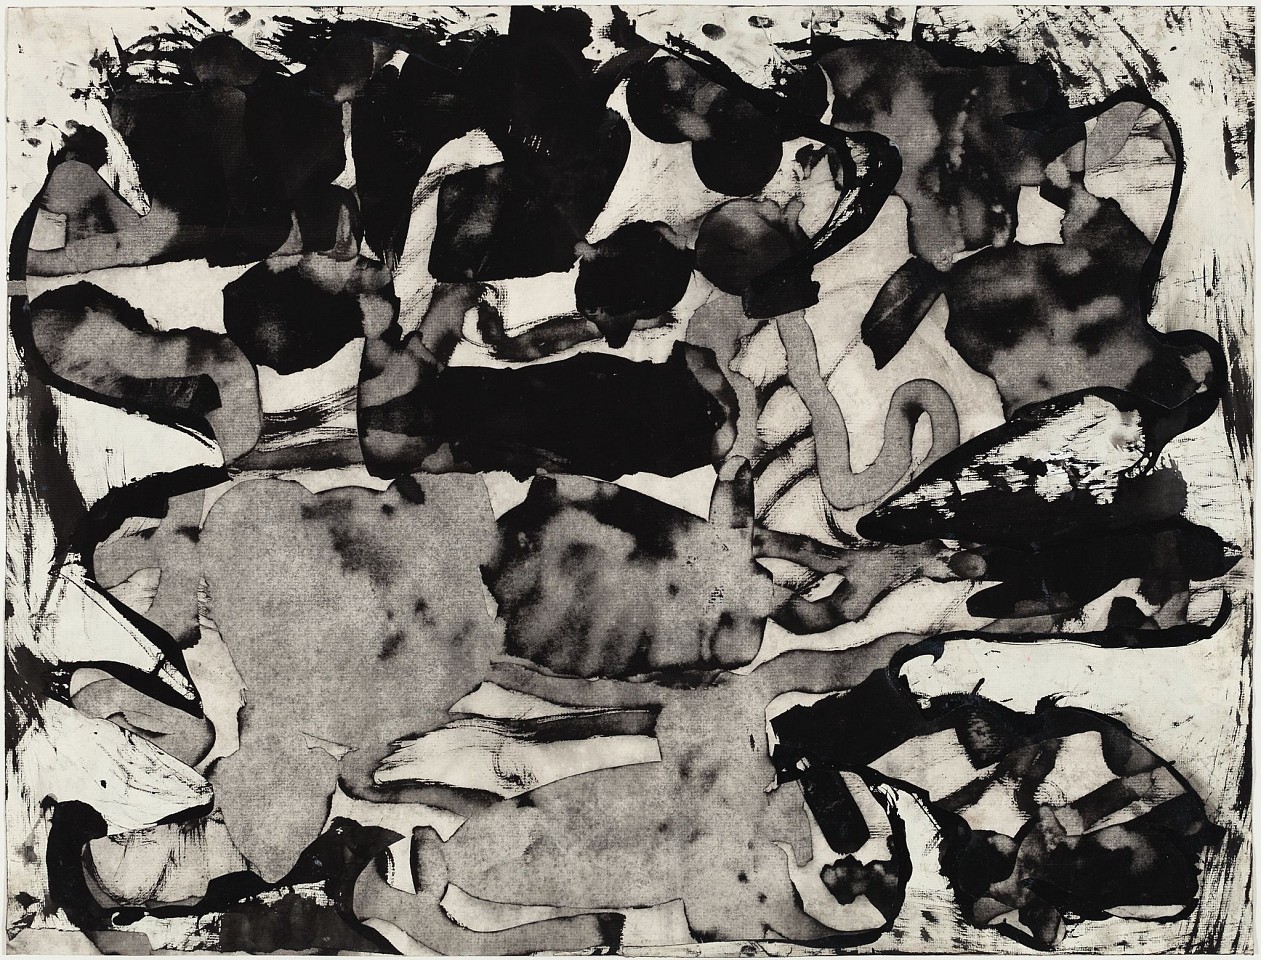 Bo Joseph
Untitled (1189), 1998
JOS244
ink and collage on paper, 18 7/8 x 24 7/8 inch paper / 22 x 28 inch frame